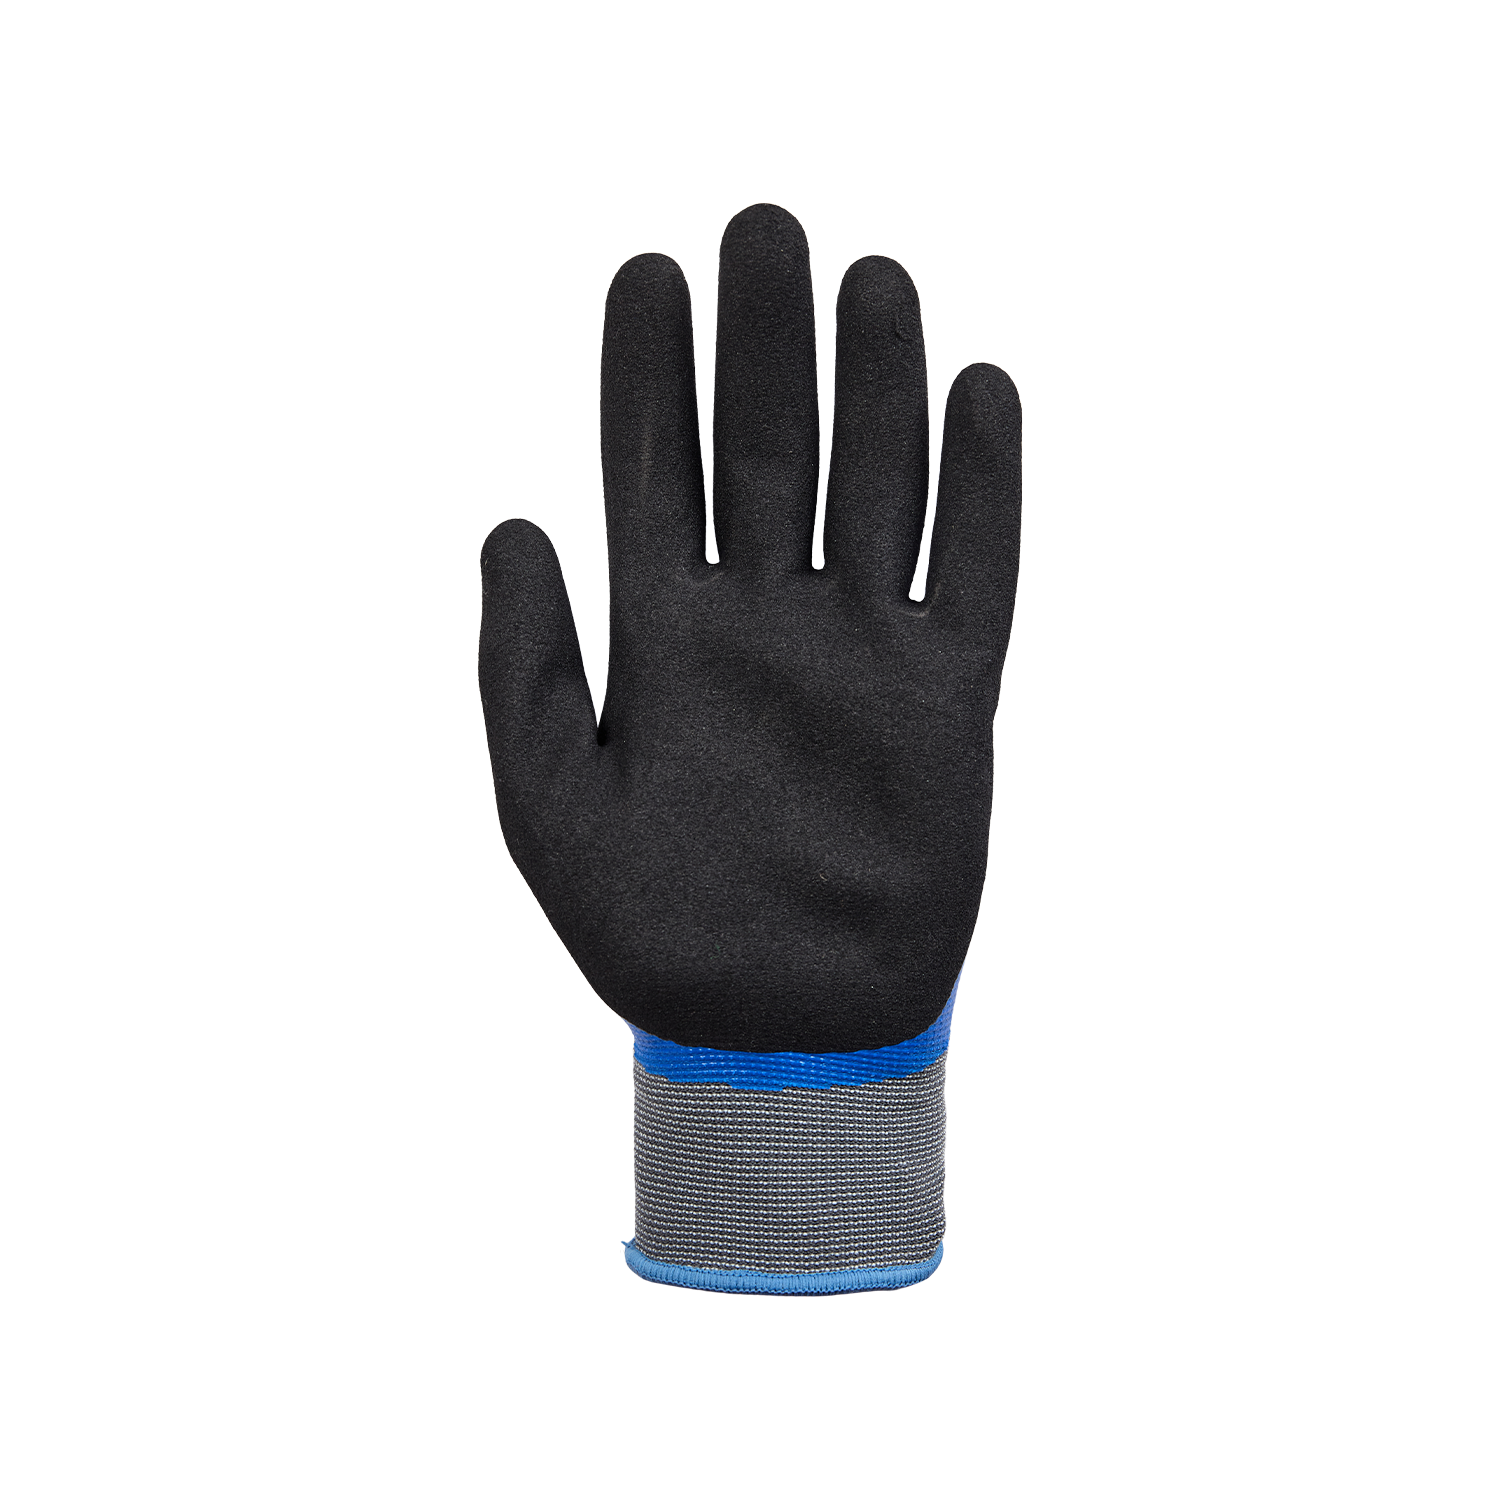 NORSE Waterproof assembly gloves size 10